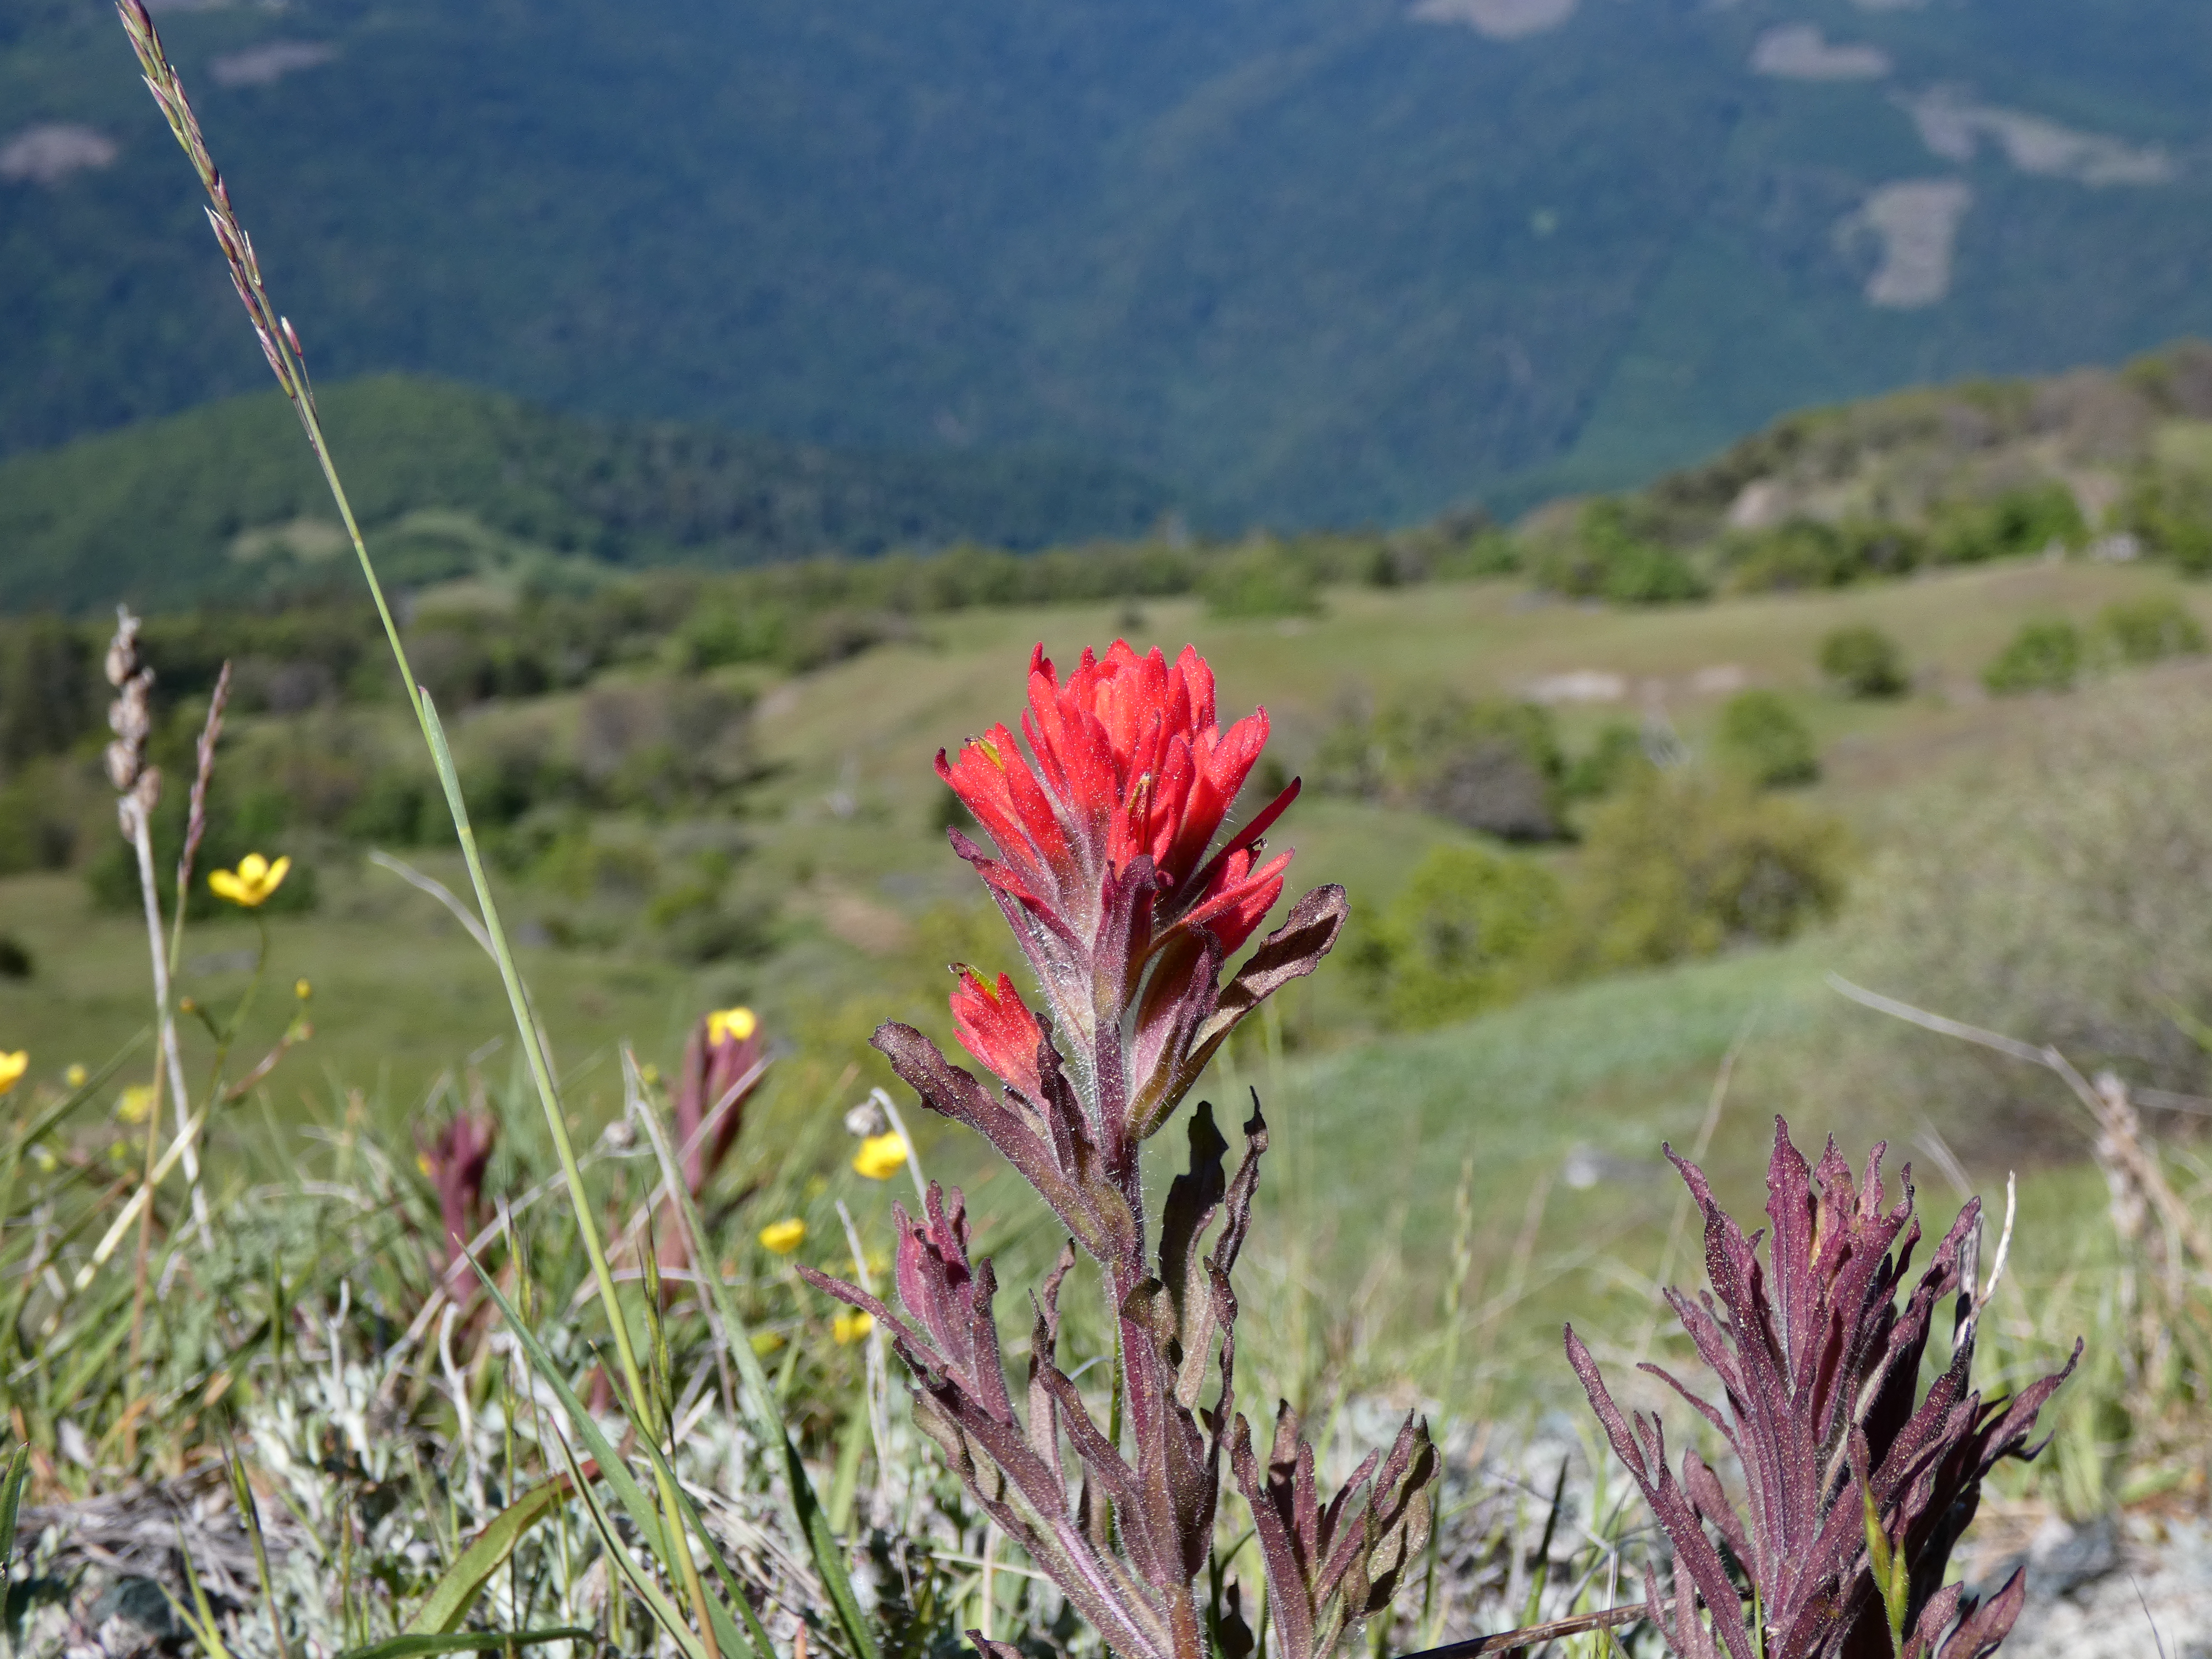 A cluster of Castilleja flowers pointing upright 